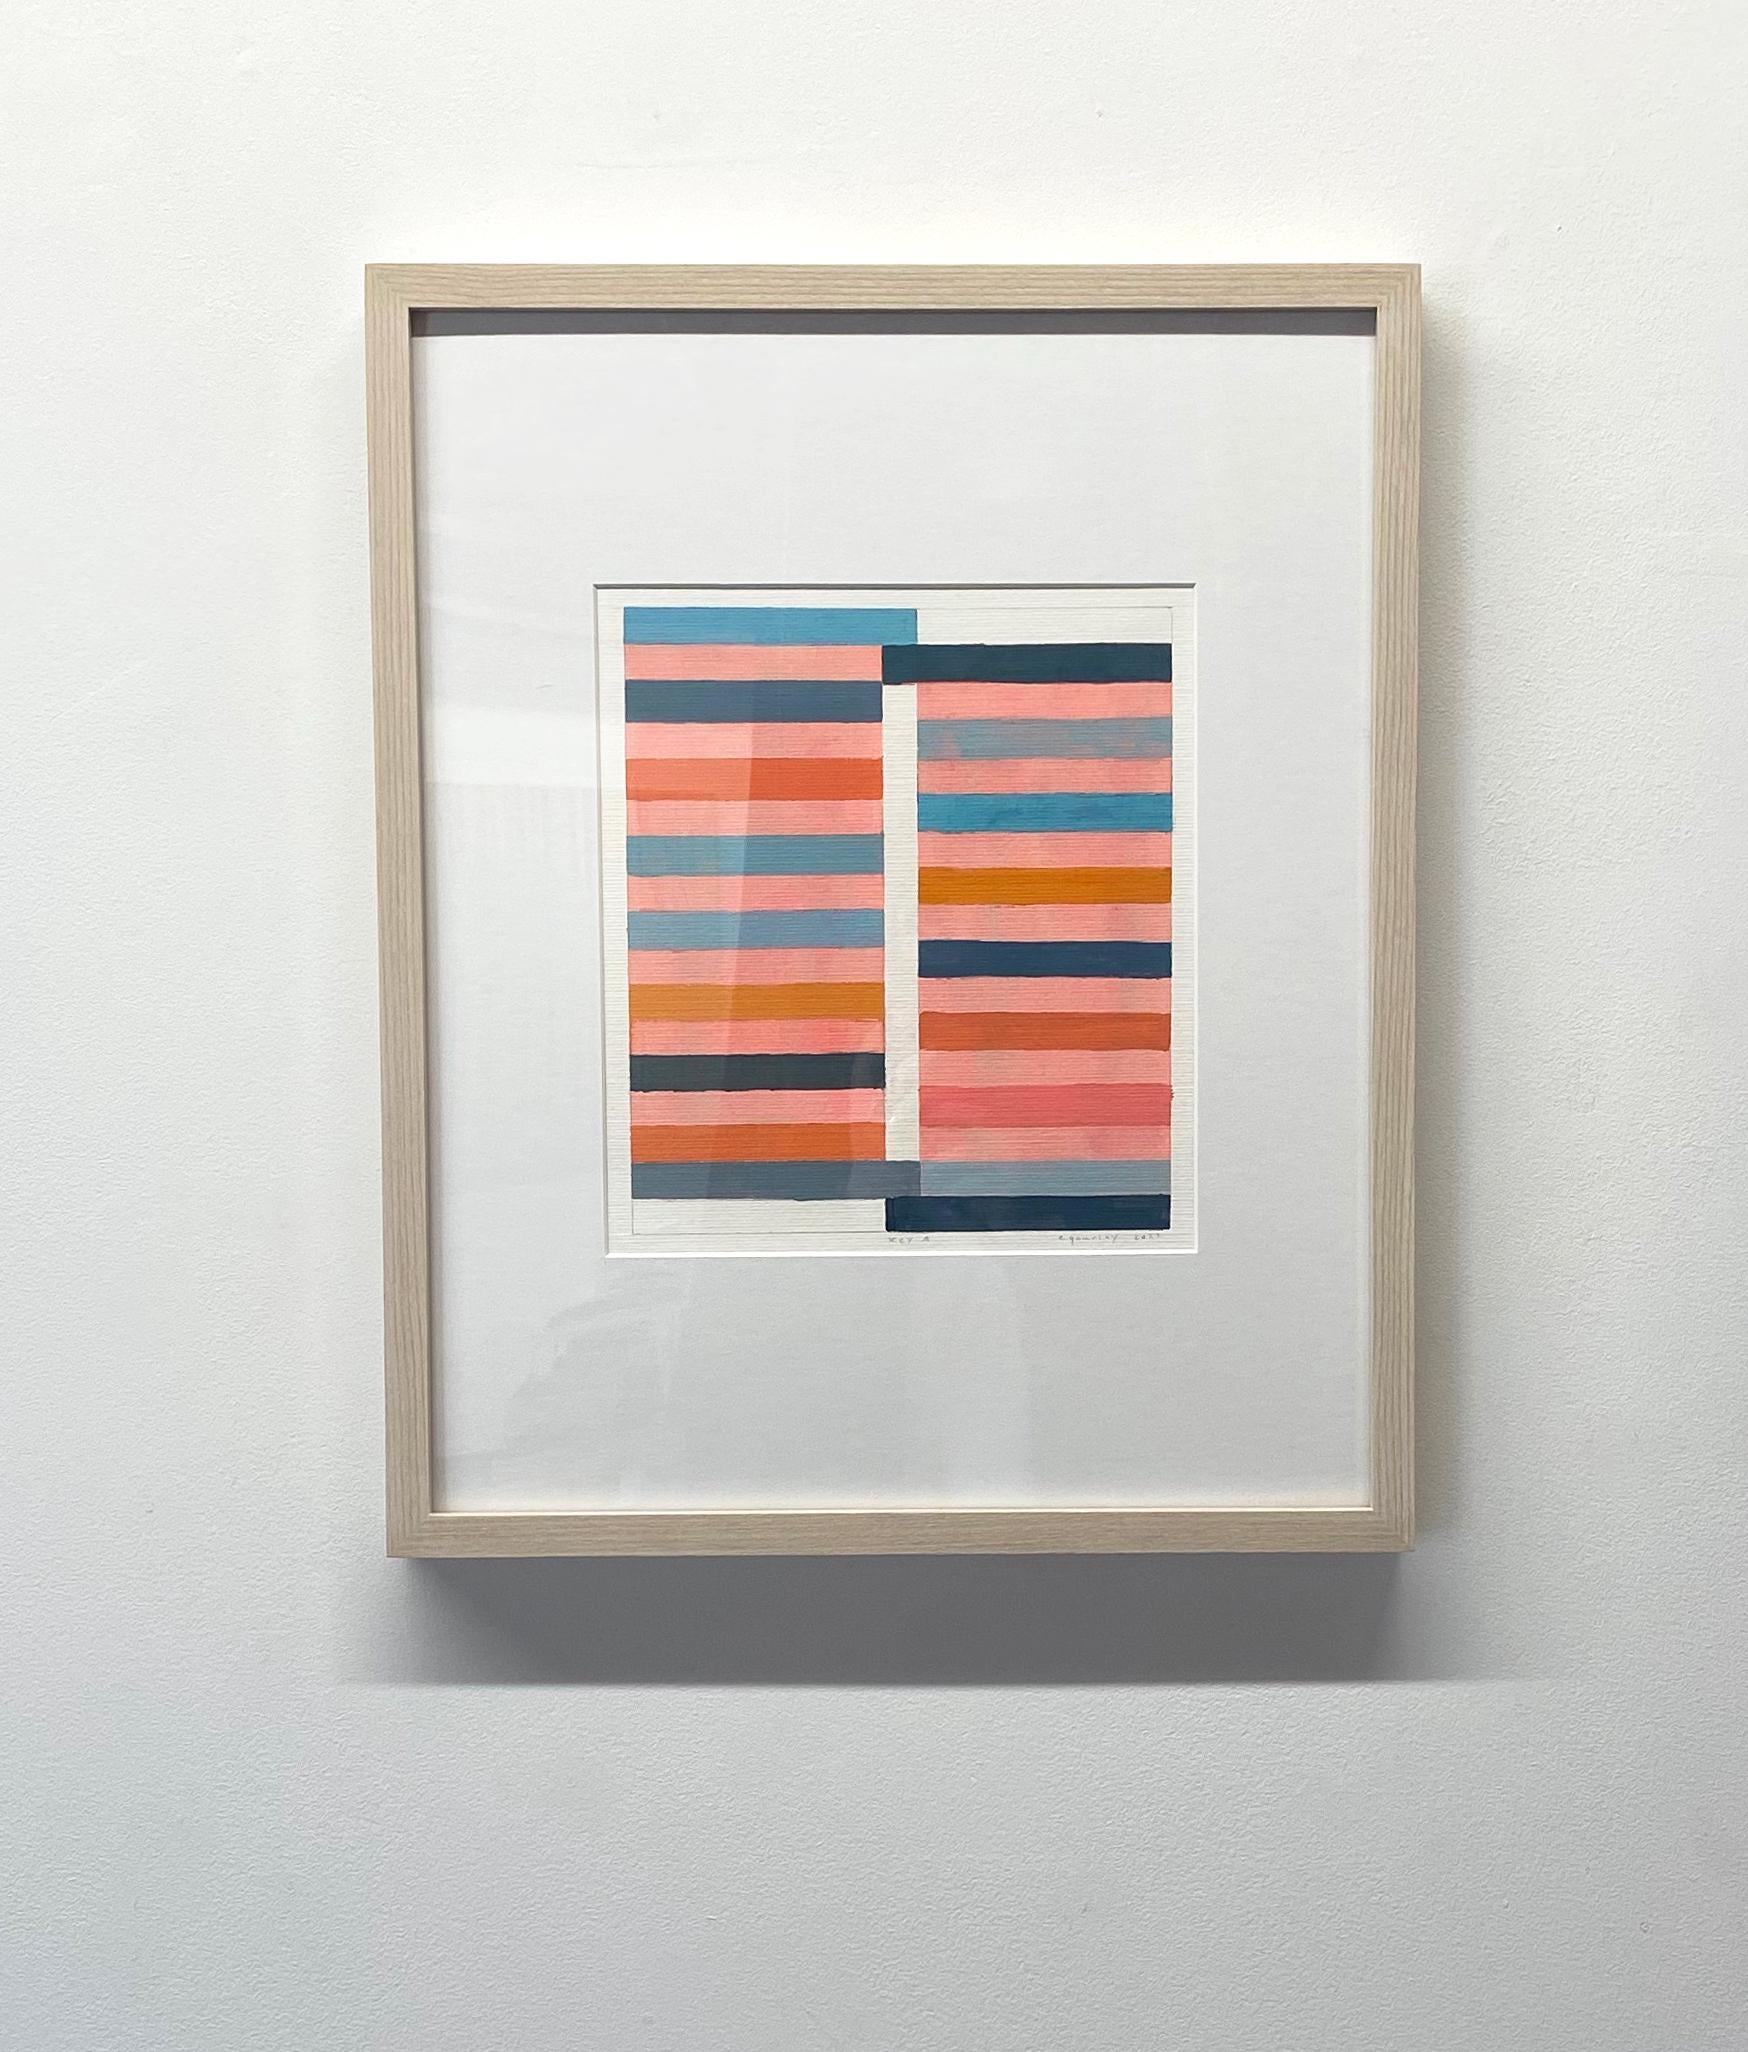 Clean and precise, carefully ordered thick horizontal stripes, blocks of color in shades of peach, light blue, dark navy, and a dark coral shade of orange are bright against the pale off-white color of the archival paper. 

Signed, dated and titled